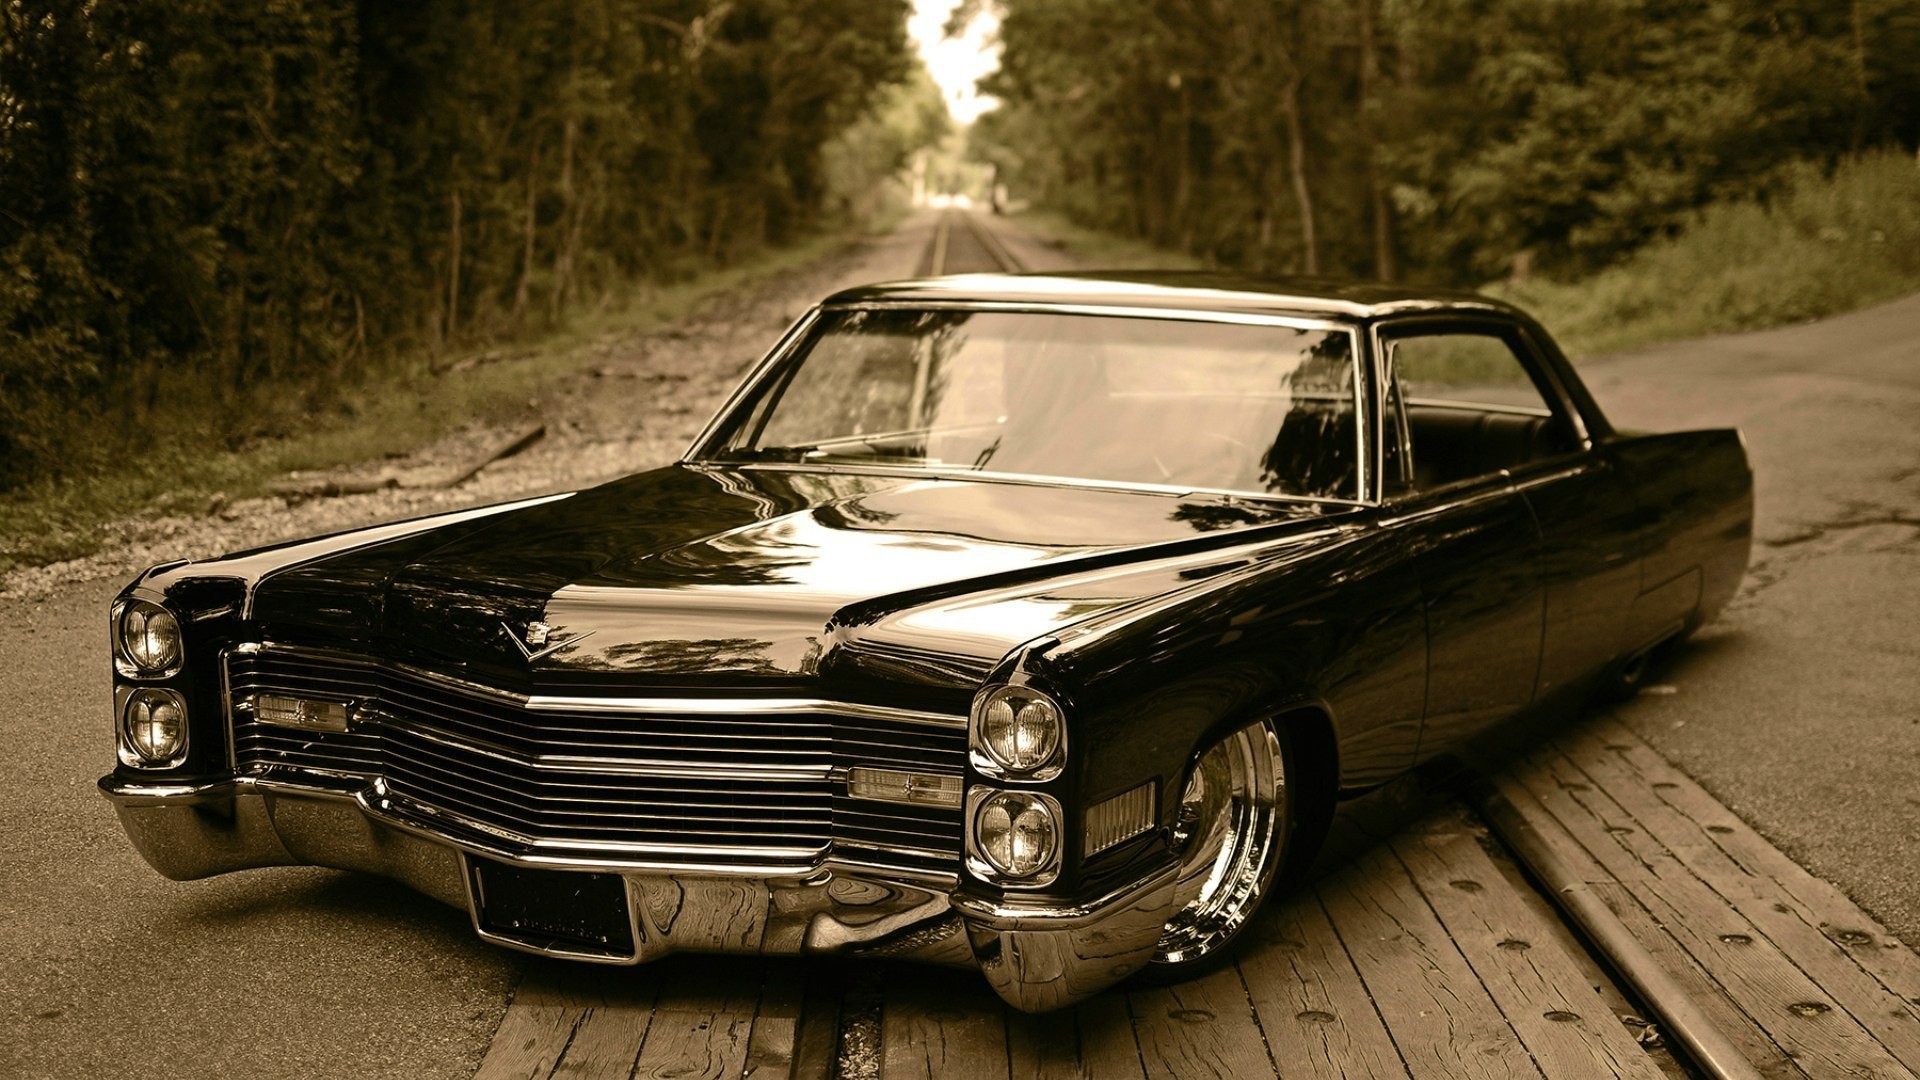 1920x1080 Nice wallpapers from Cadillac including some new models and the old  lowriders